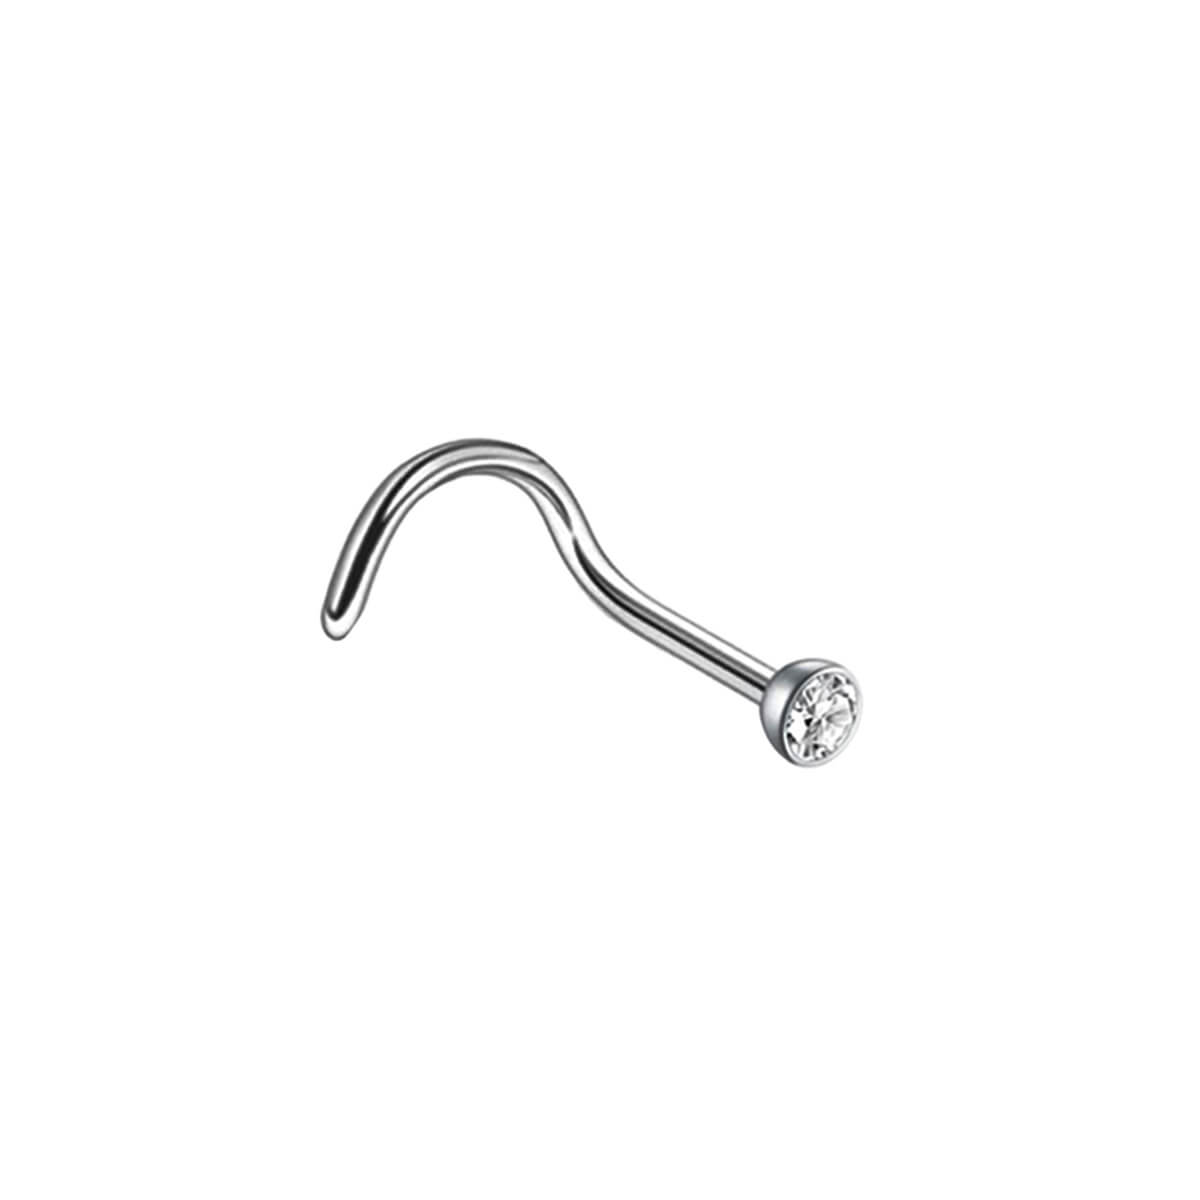 Spiral nose ring with stone 0.8mm (Steel 316L)